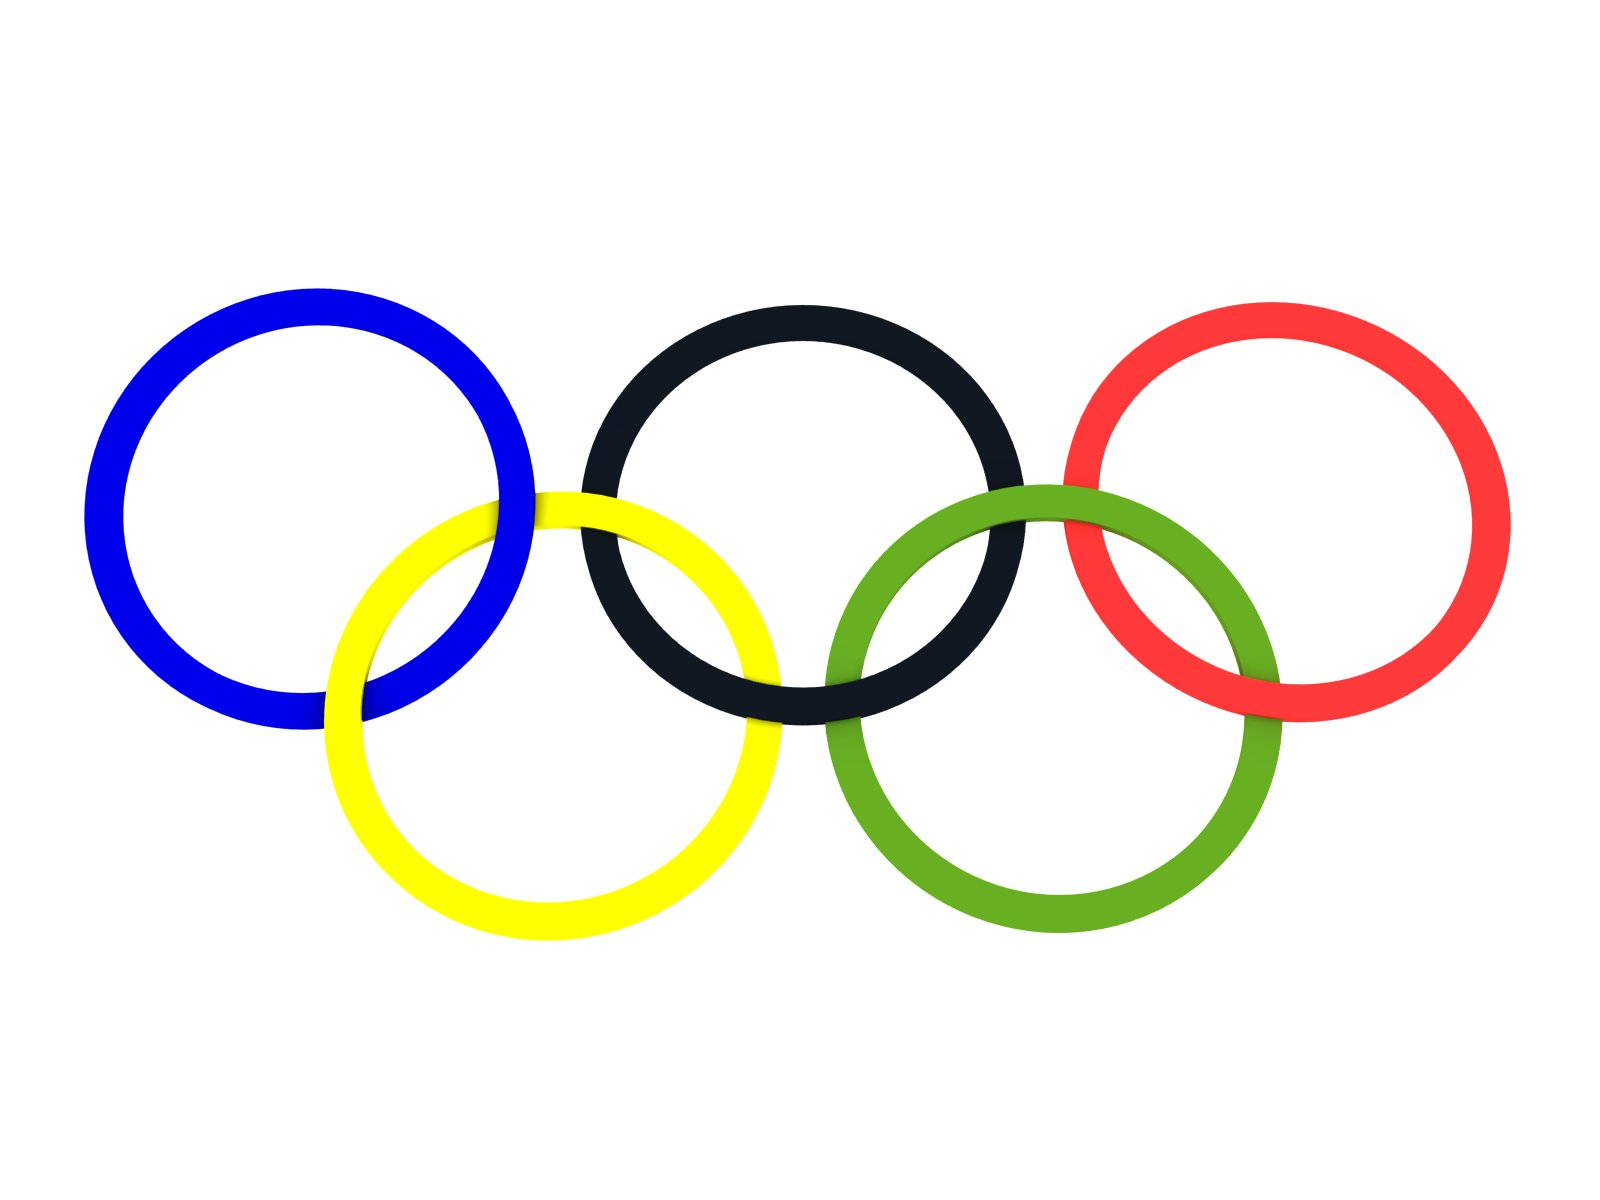 25 Outstanding Olympic Crafts for Kids to Make